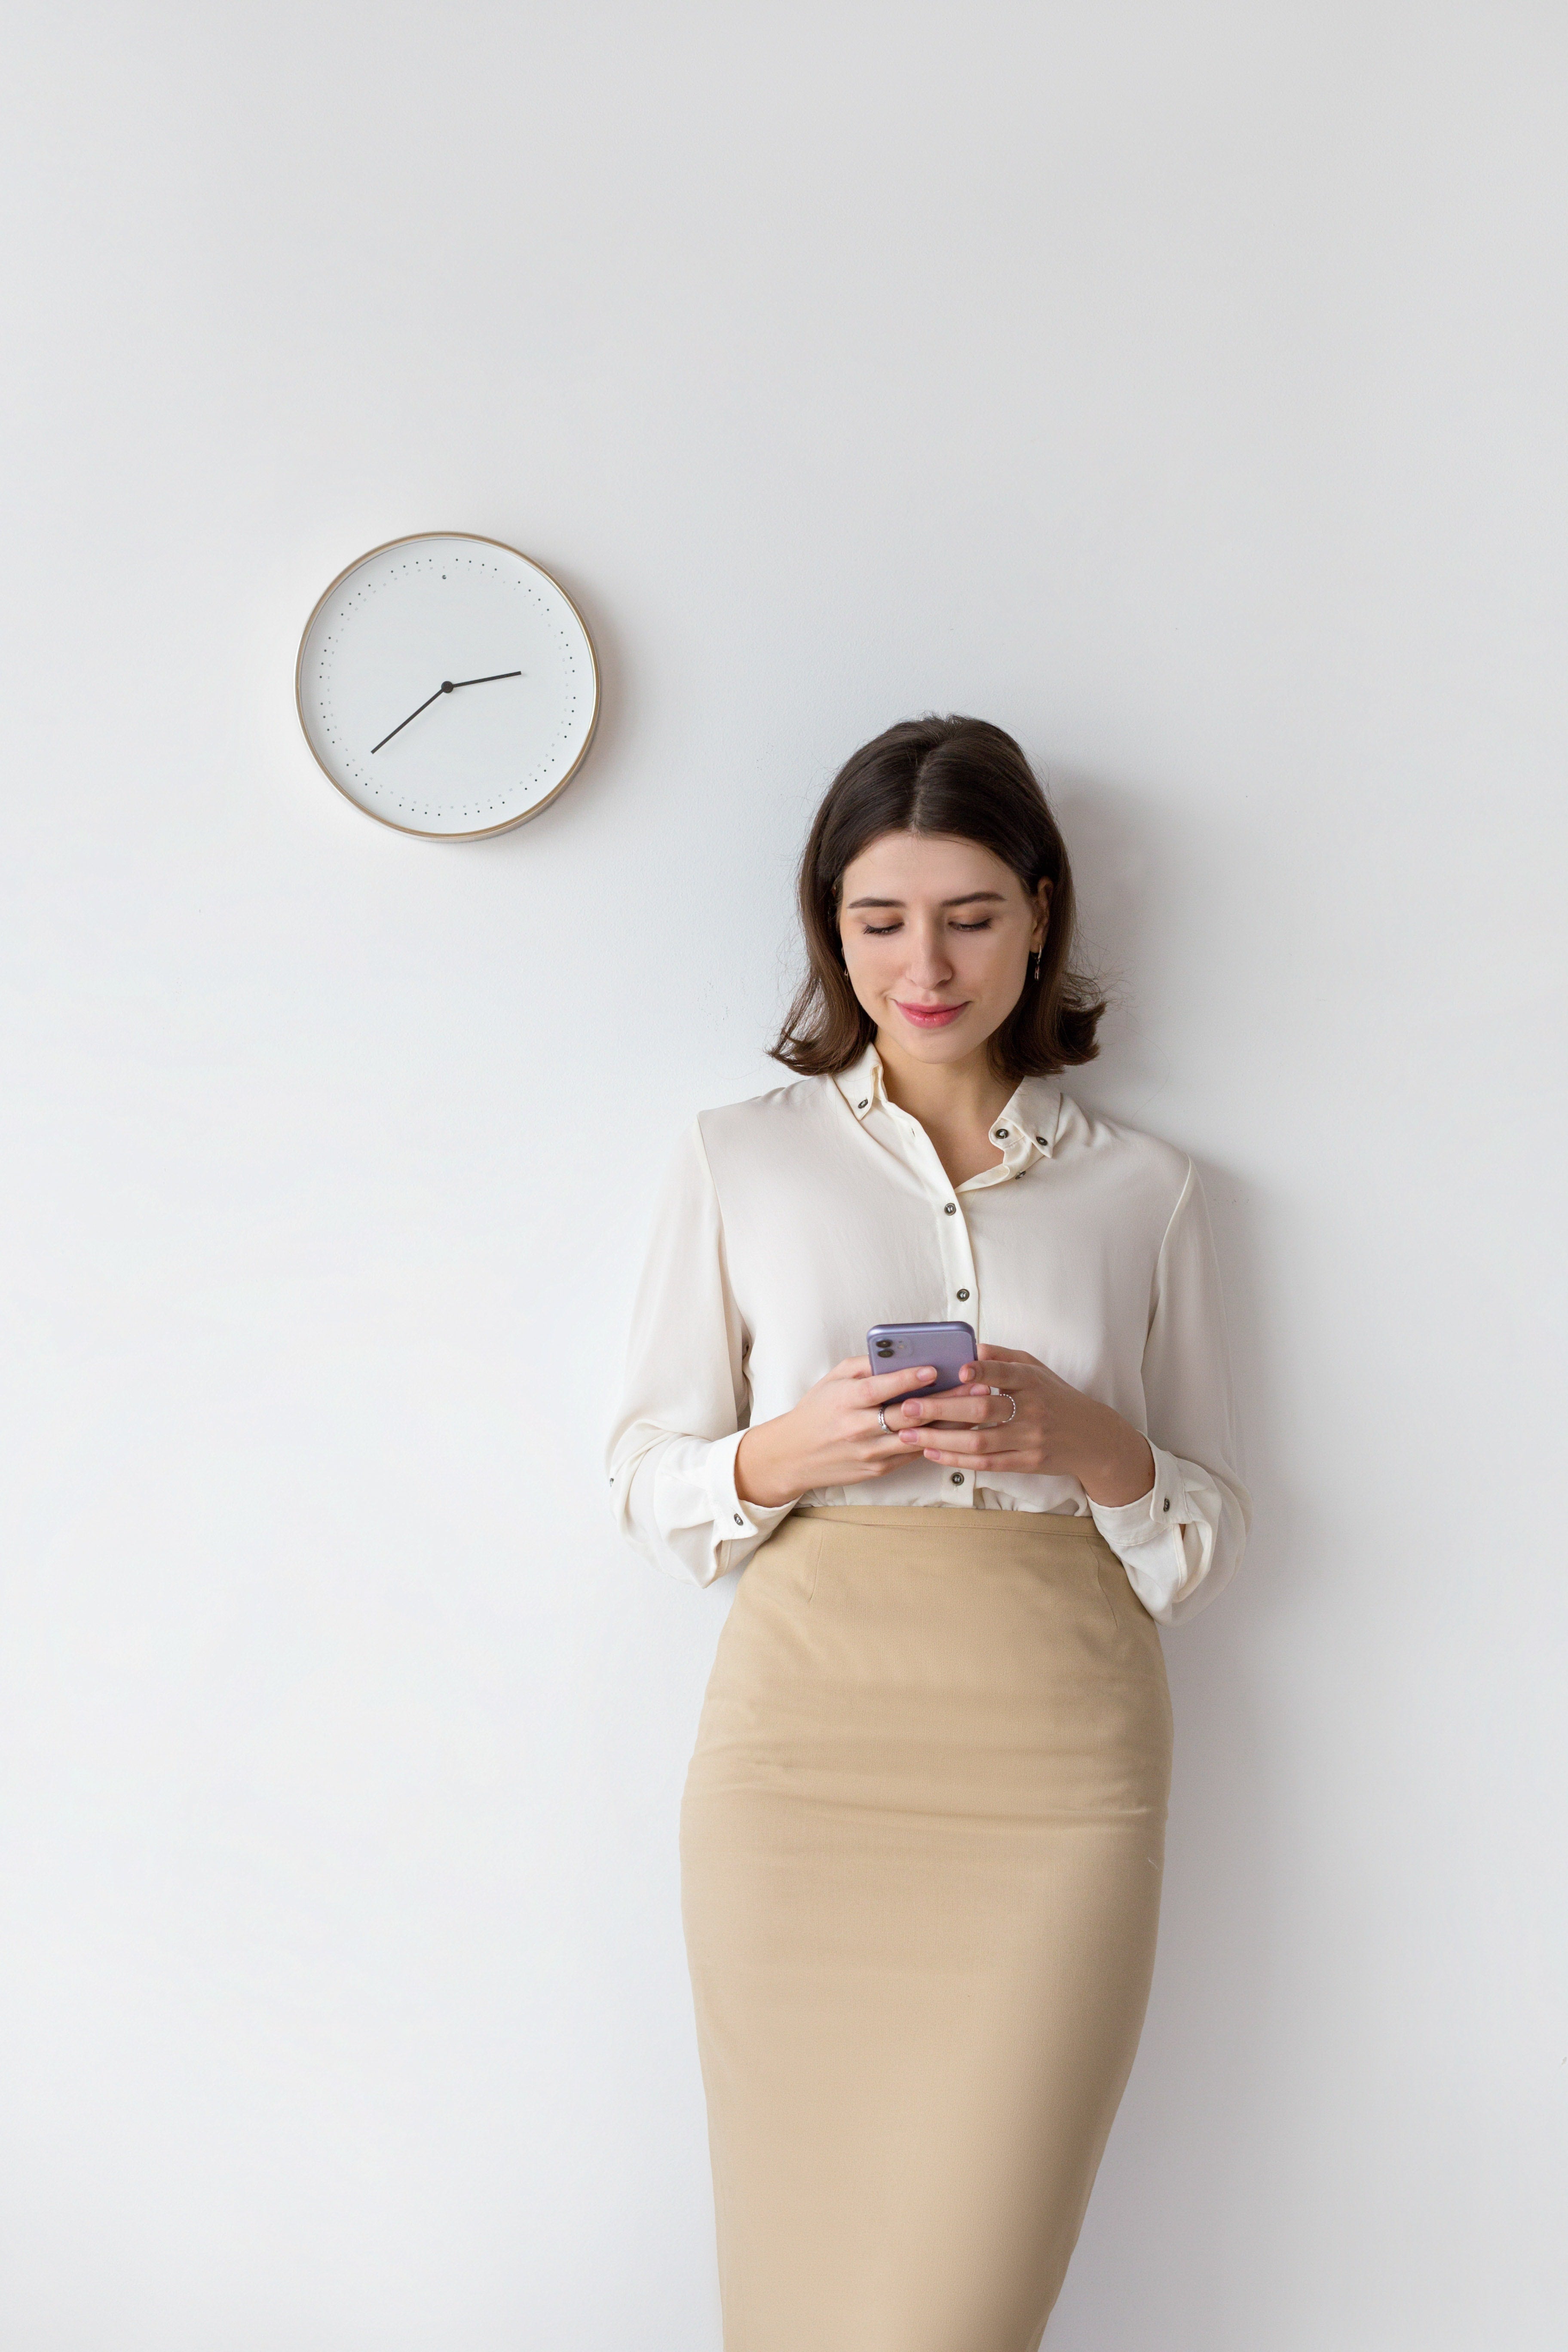 Woman with a phone against a wall with a clock beside her representing last minute booking